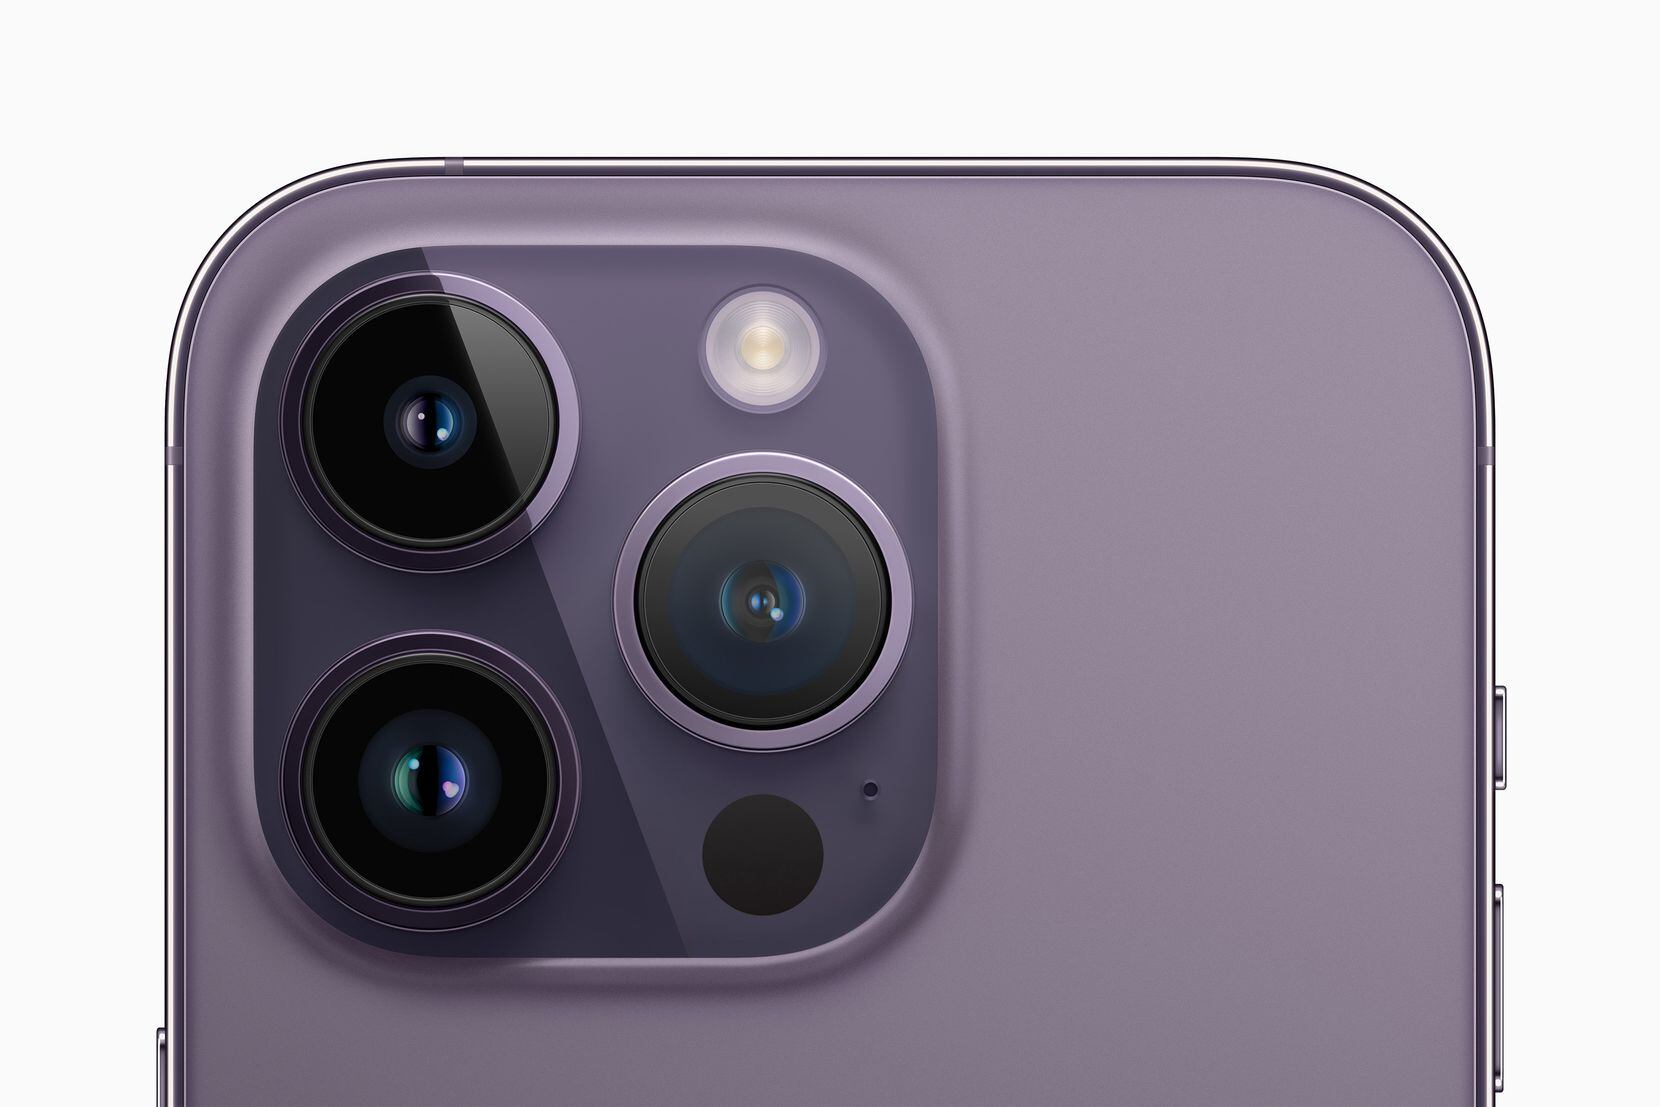 The main camera on the Apple iPhone 14 Pro has a 24mm wide-angle lens with a...